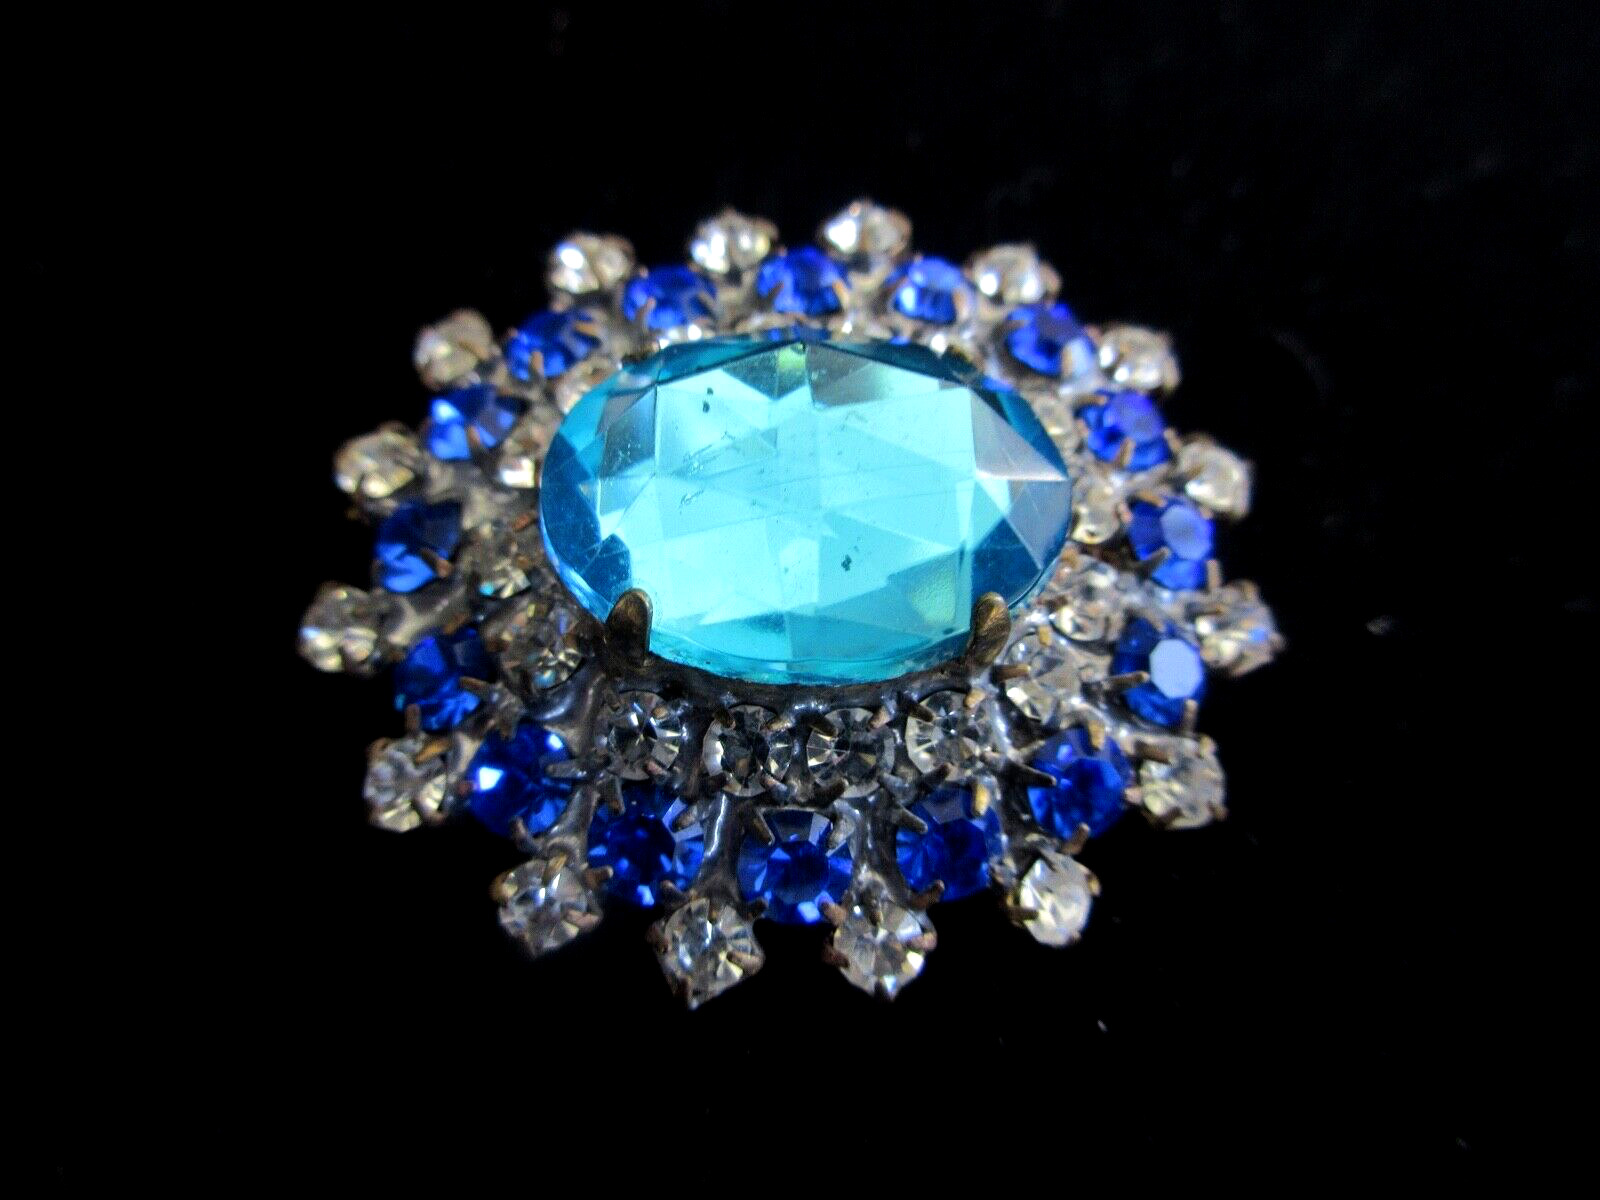 Gorgeous Czech Vintage Glass Rhinestone Button    Shades of Blue & Crystal